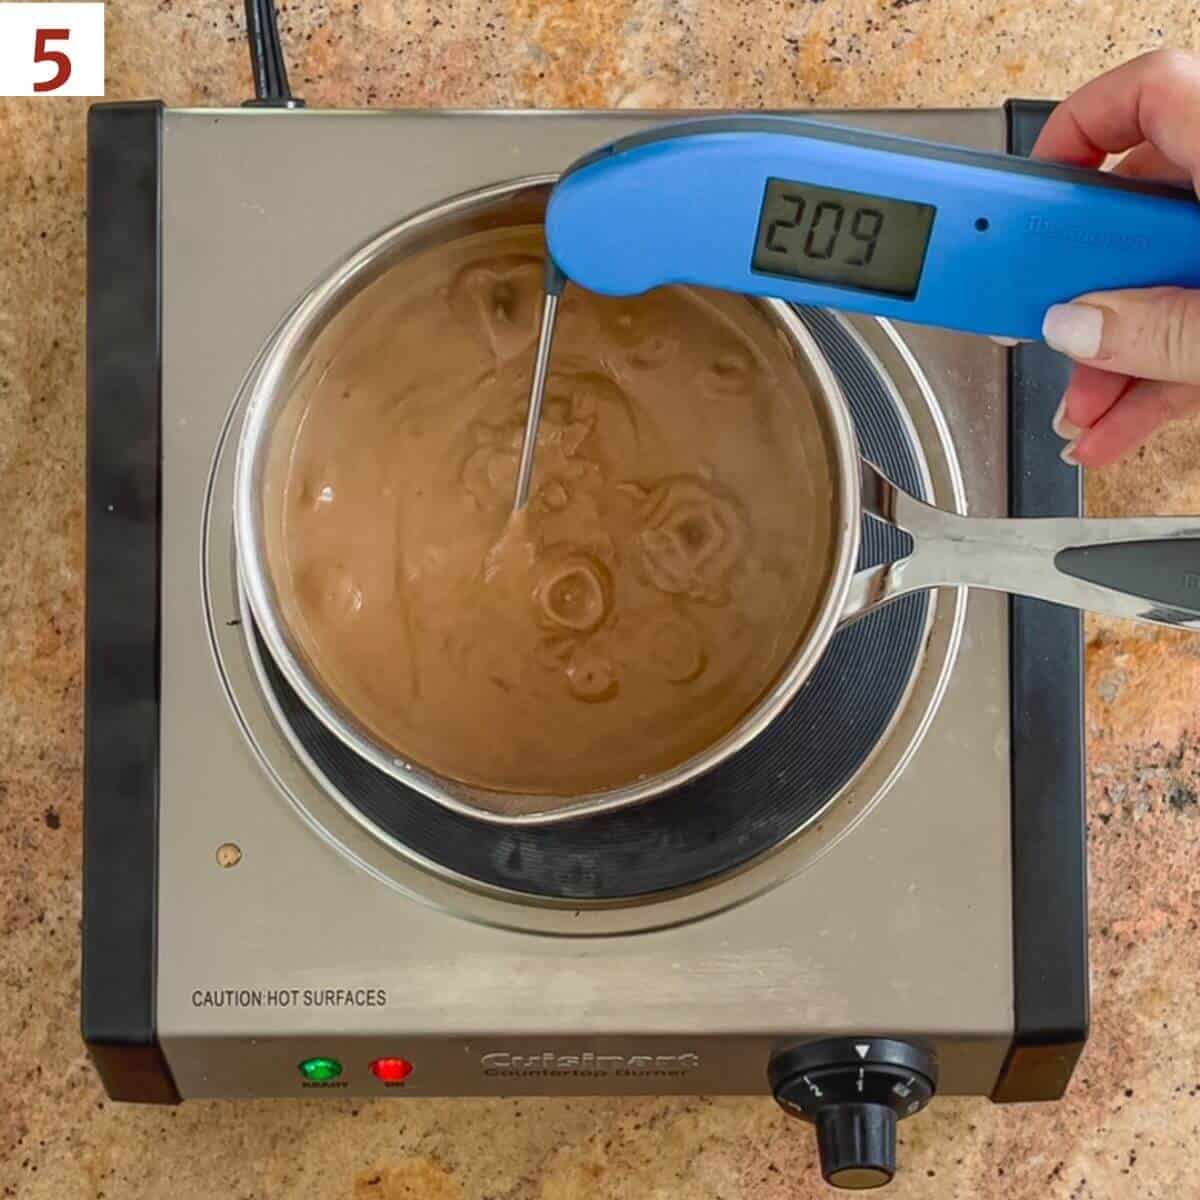 Taking the temperature of cooking chocolate custard with a digital thermometer showing 209˚F.